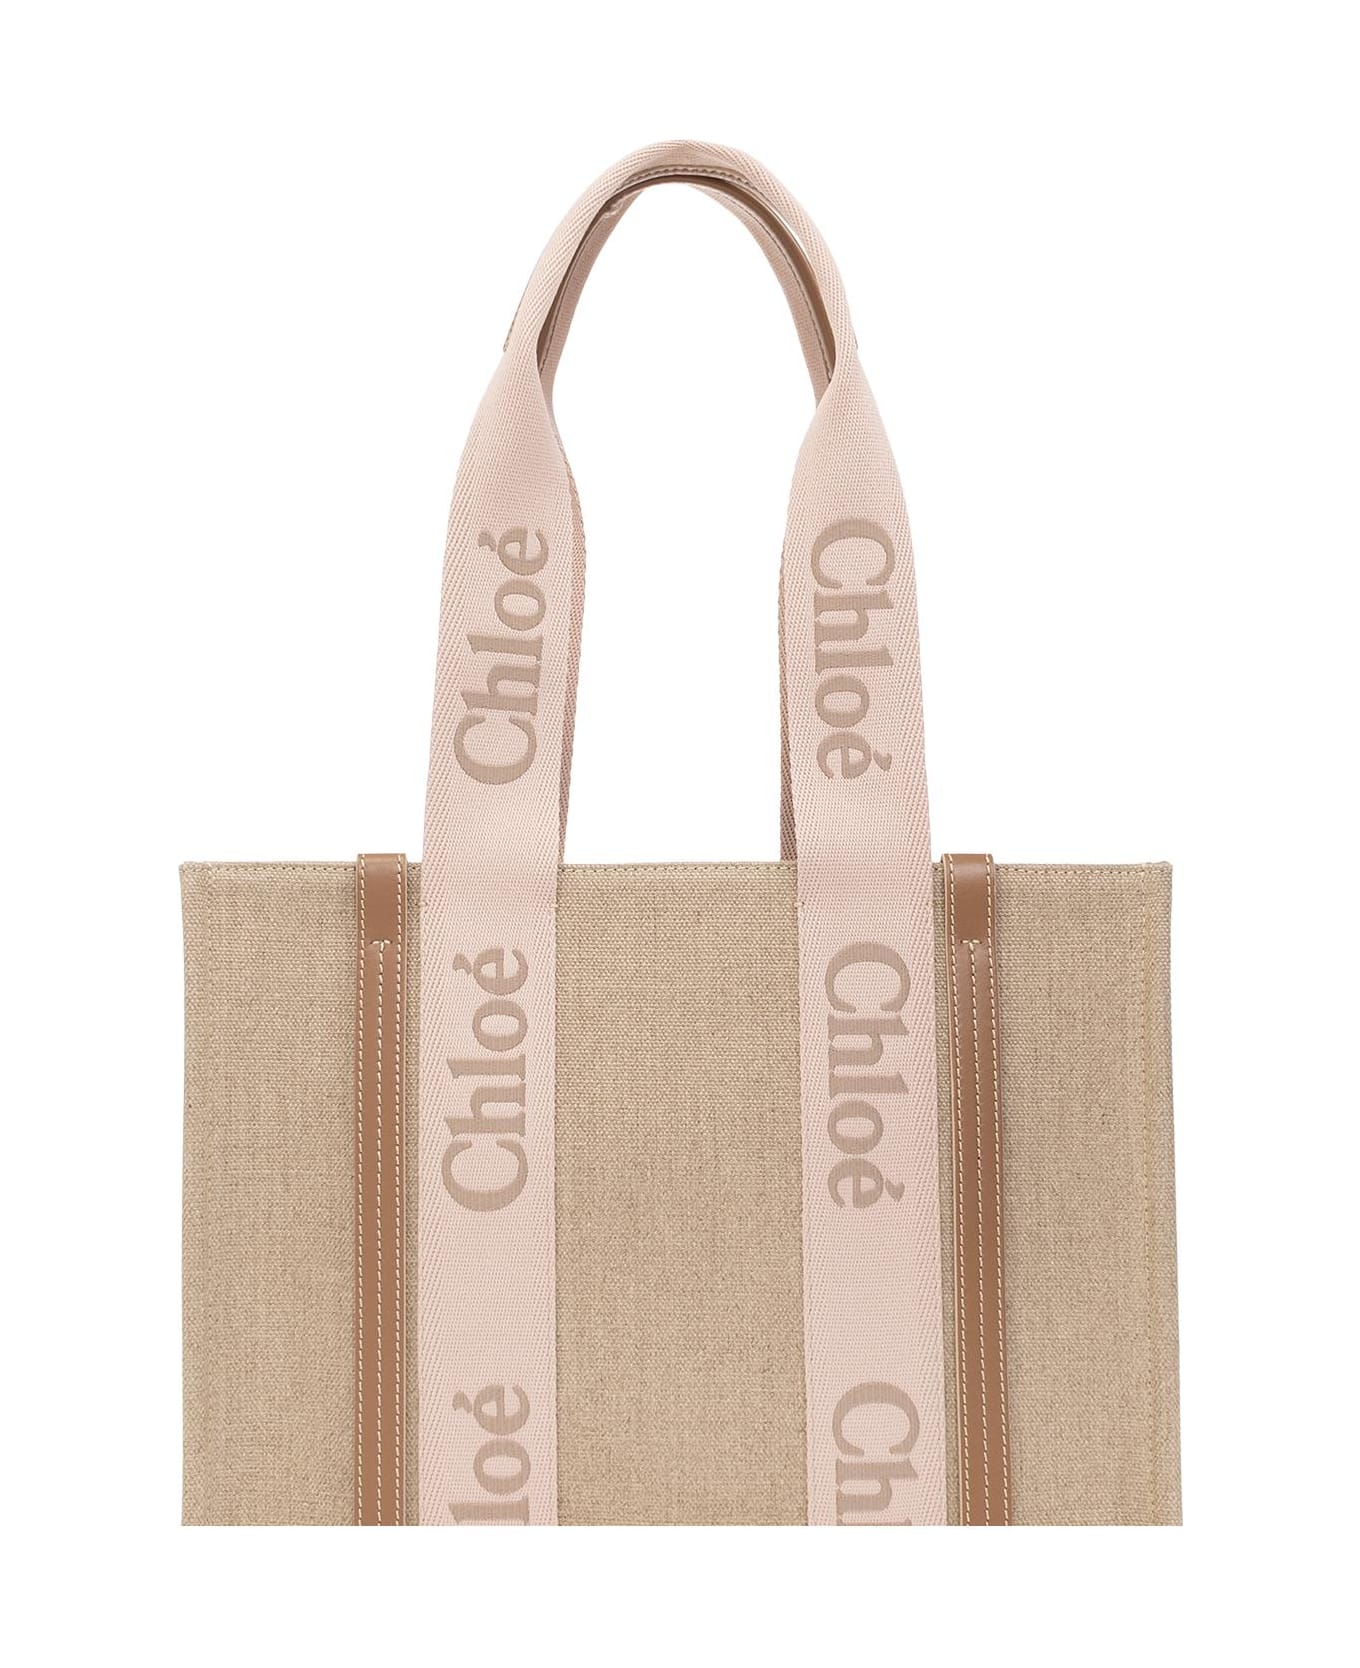 Chloé Pink And Beige Woody Medium Shopping Bag With Shoulder Strap - Beige